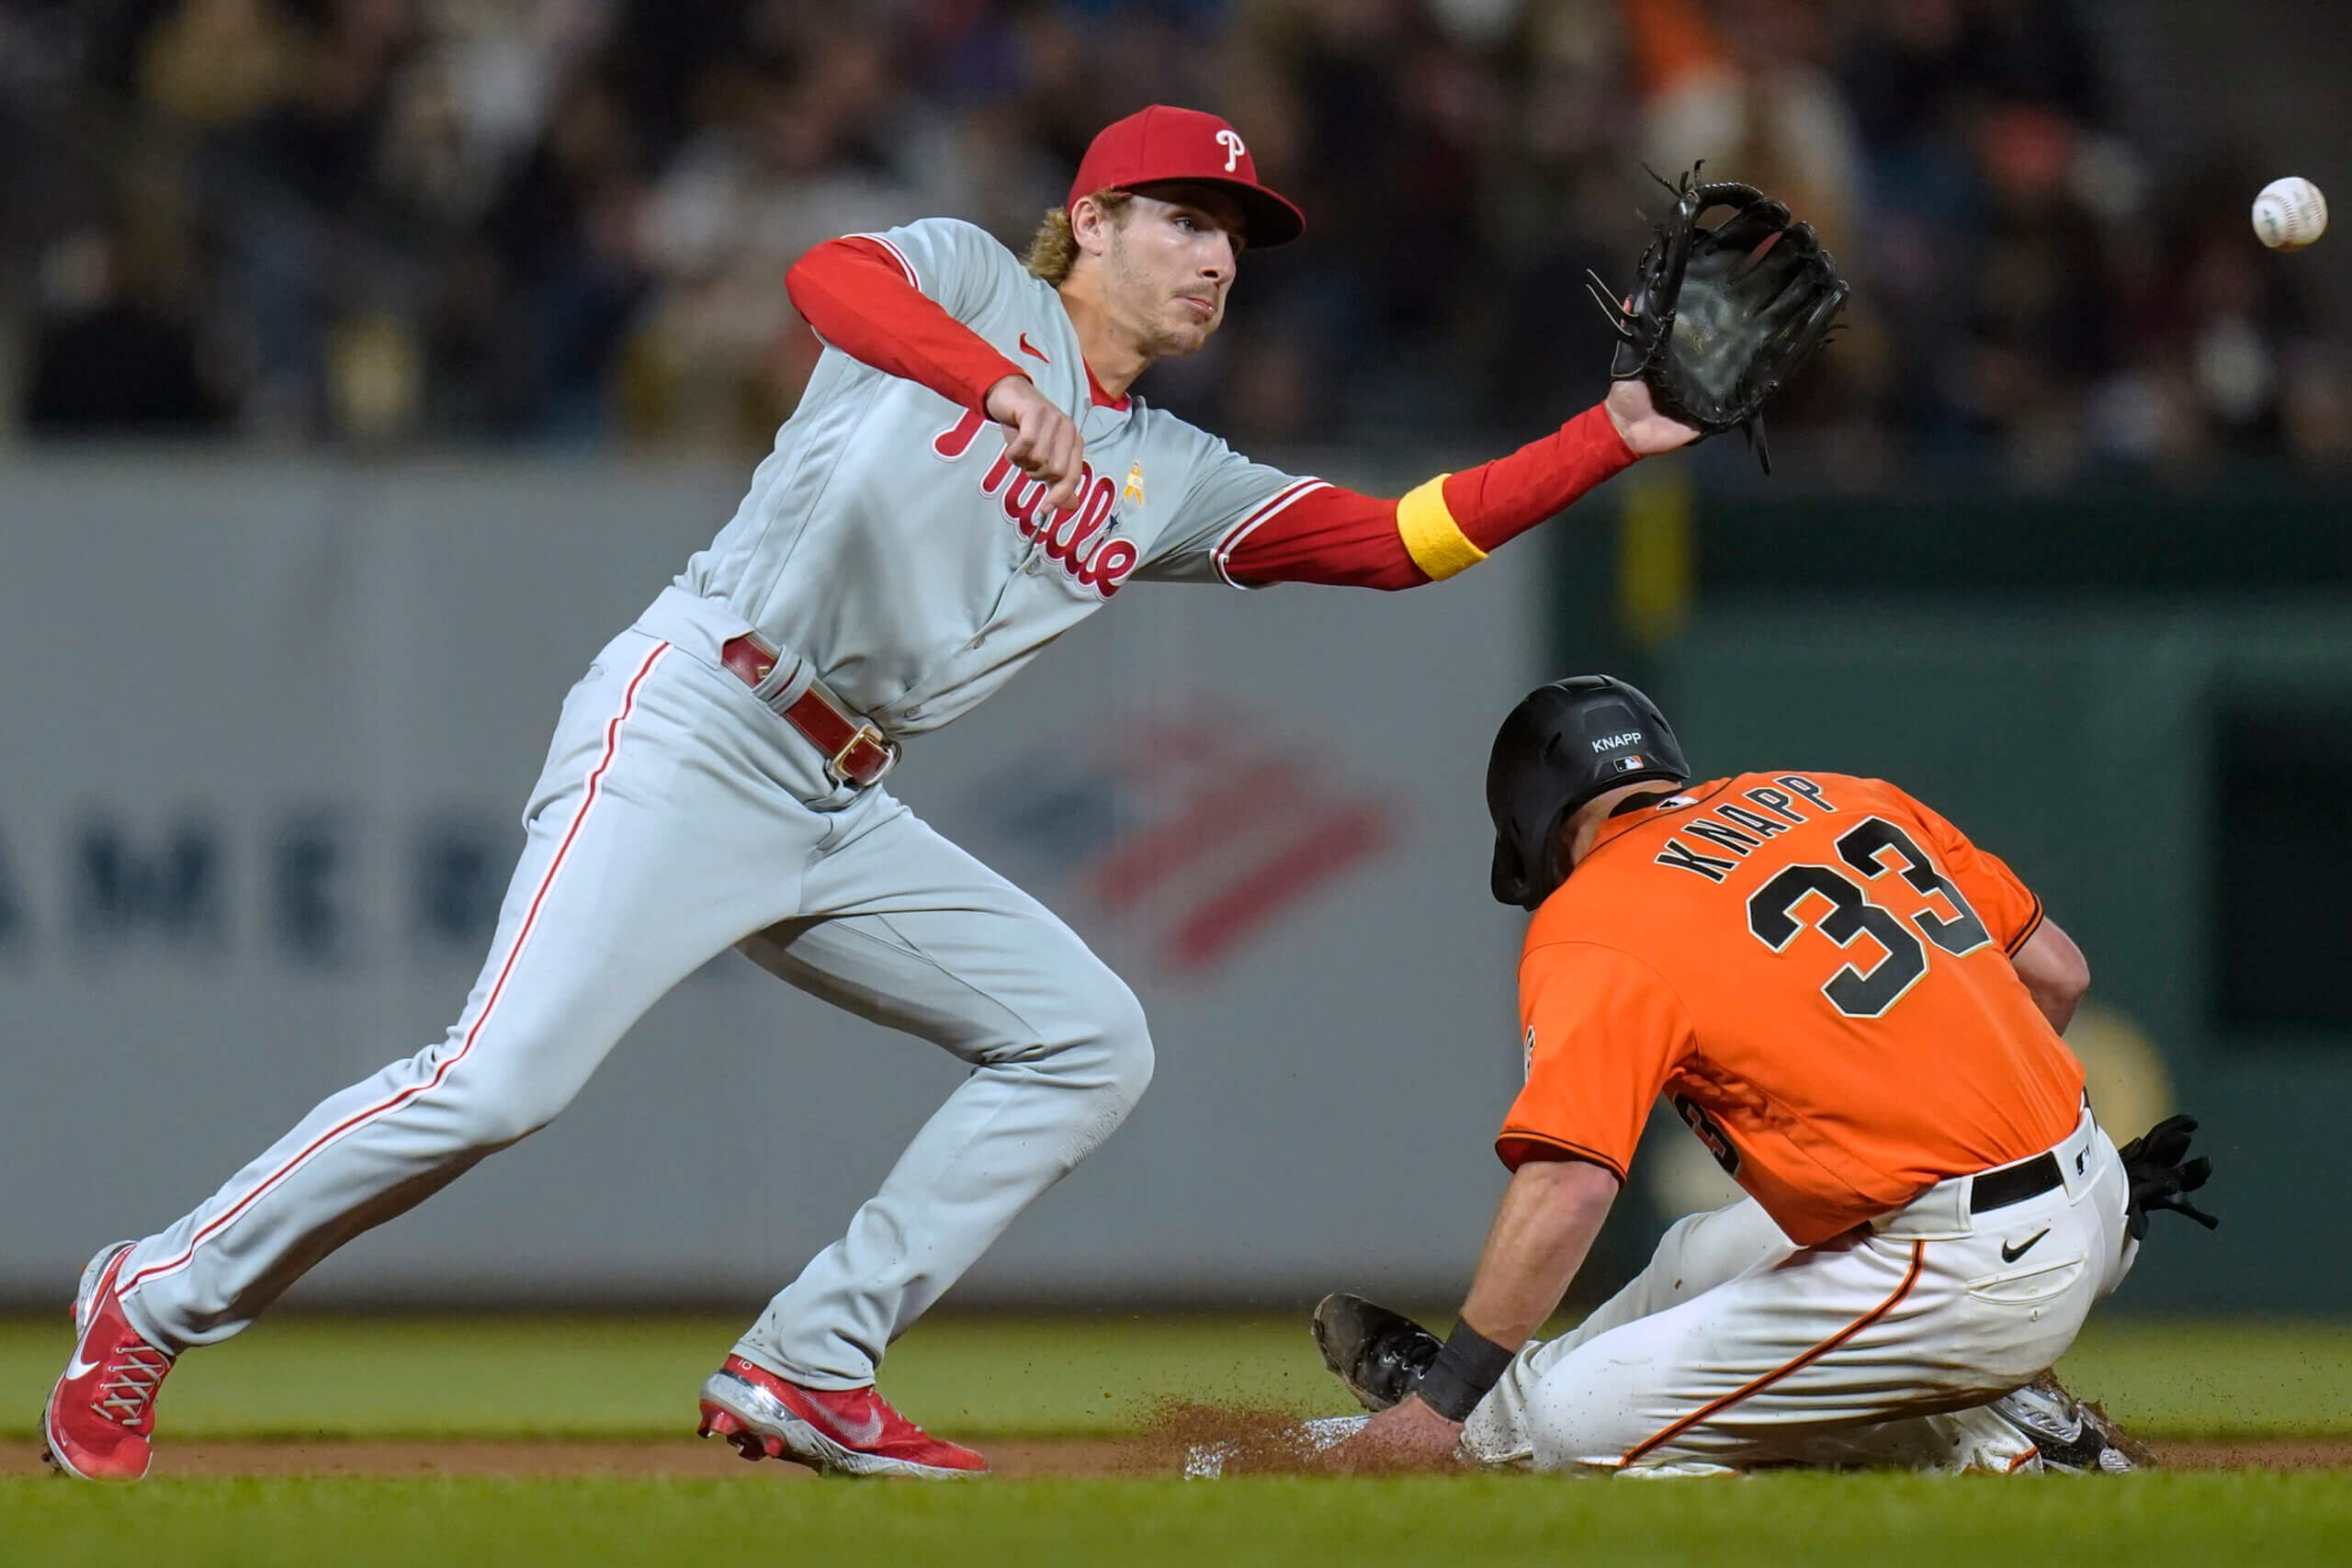 Giants vs. Phillies prediction and updated Caesars odds for the